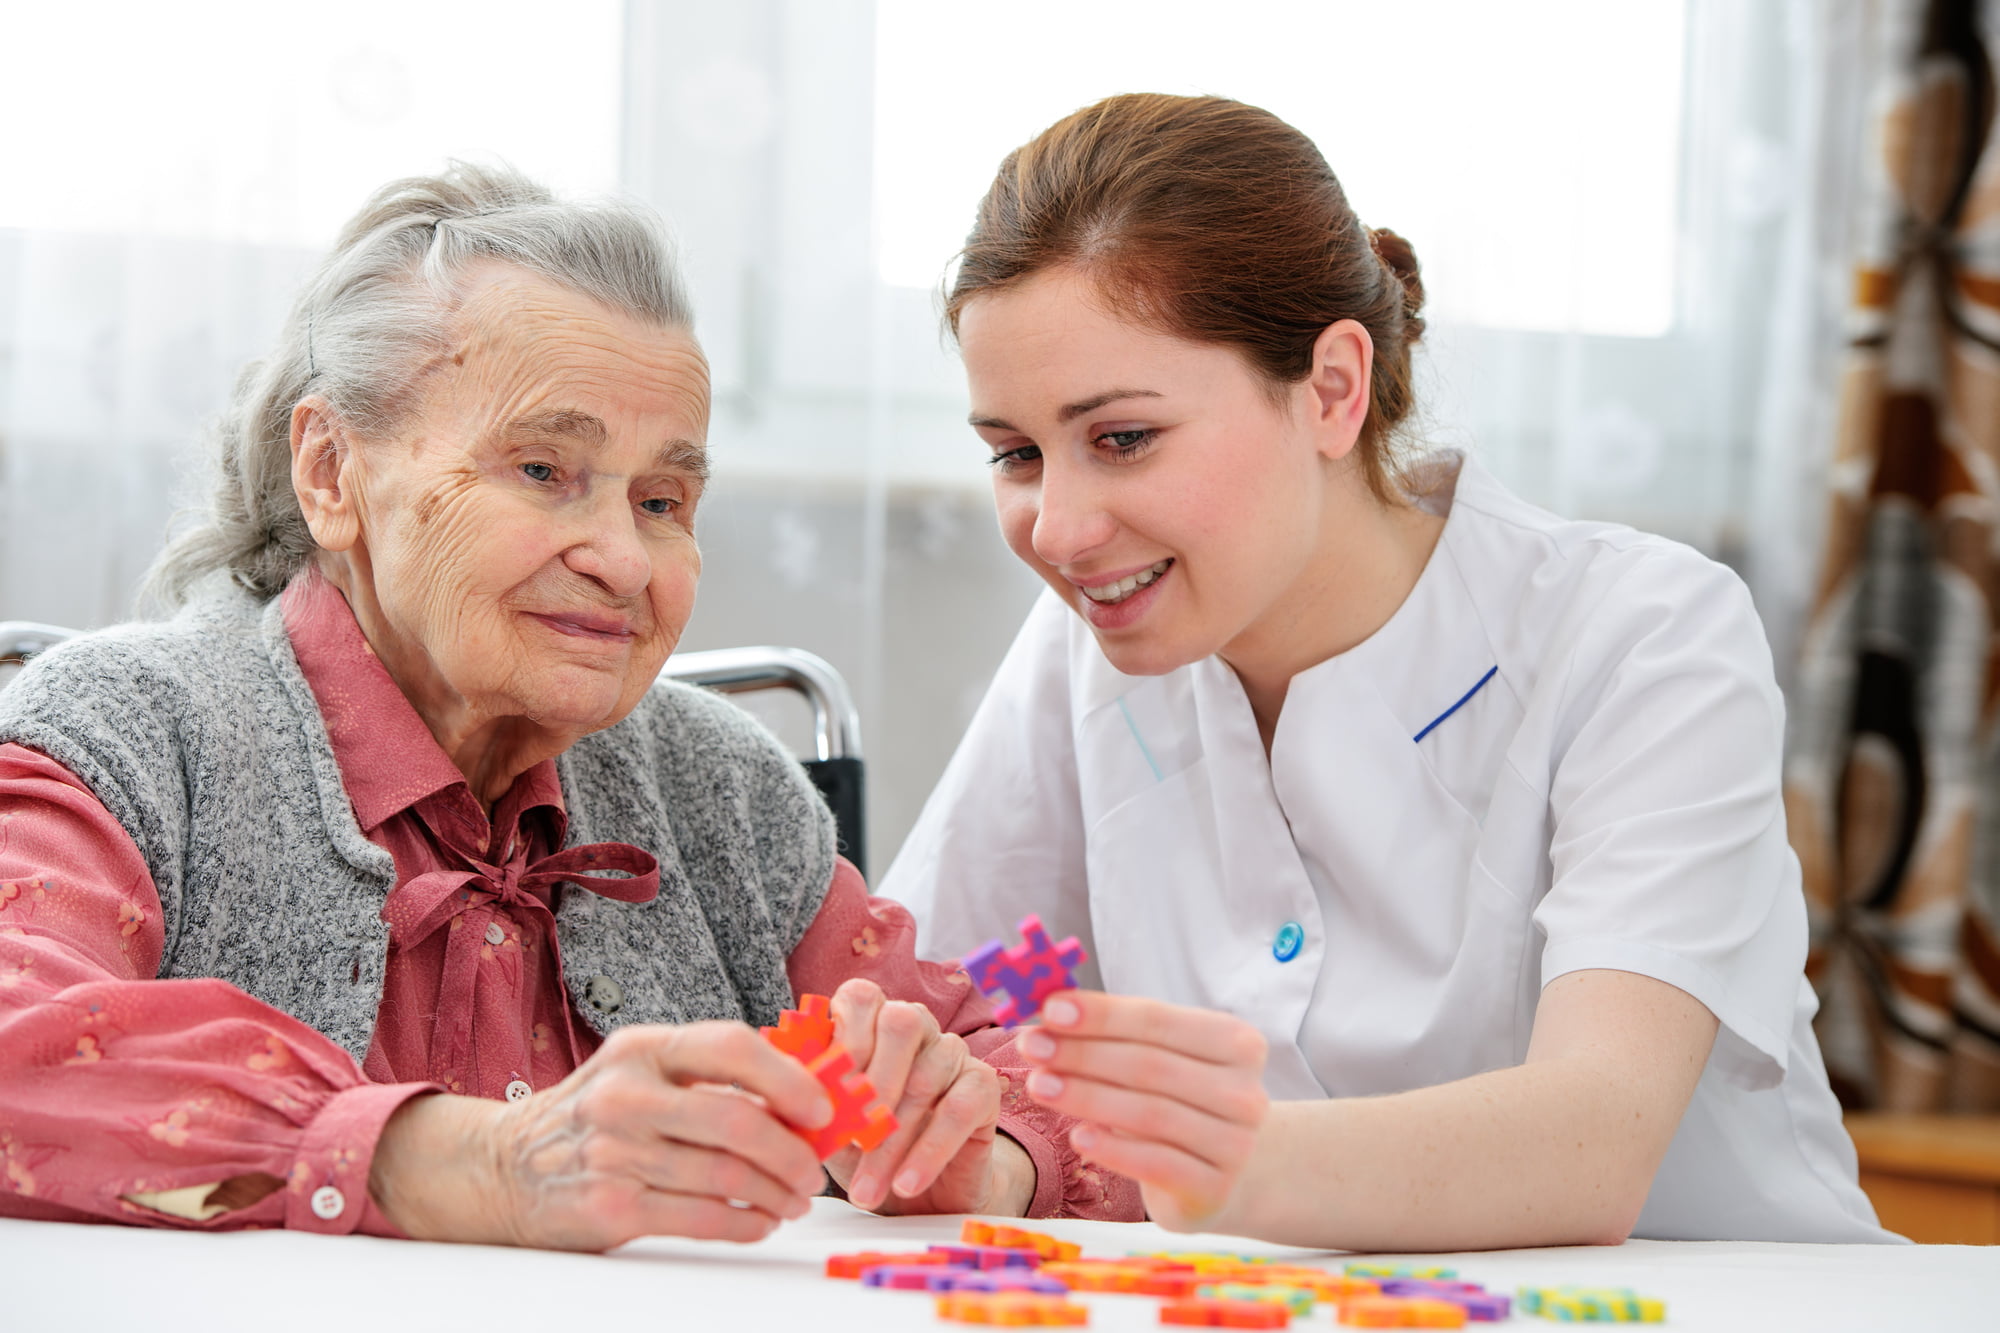 Quality veteran assisted living will provide your loved one with safe and supportive care. Here's how to find veteran assisted living and other care options.